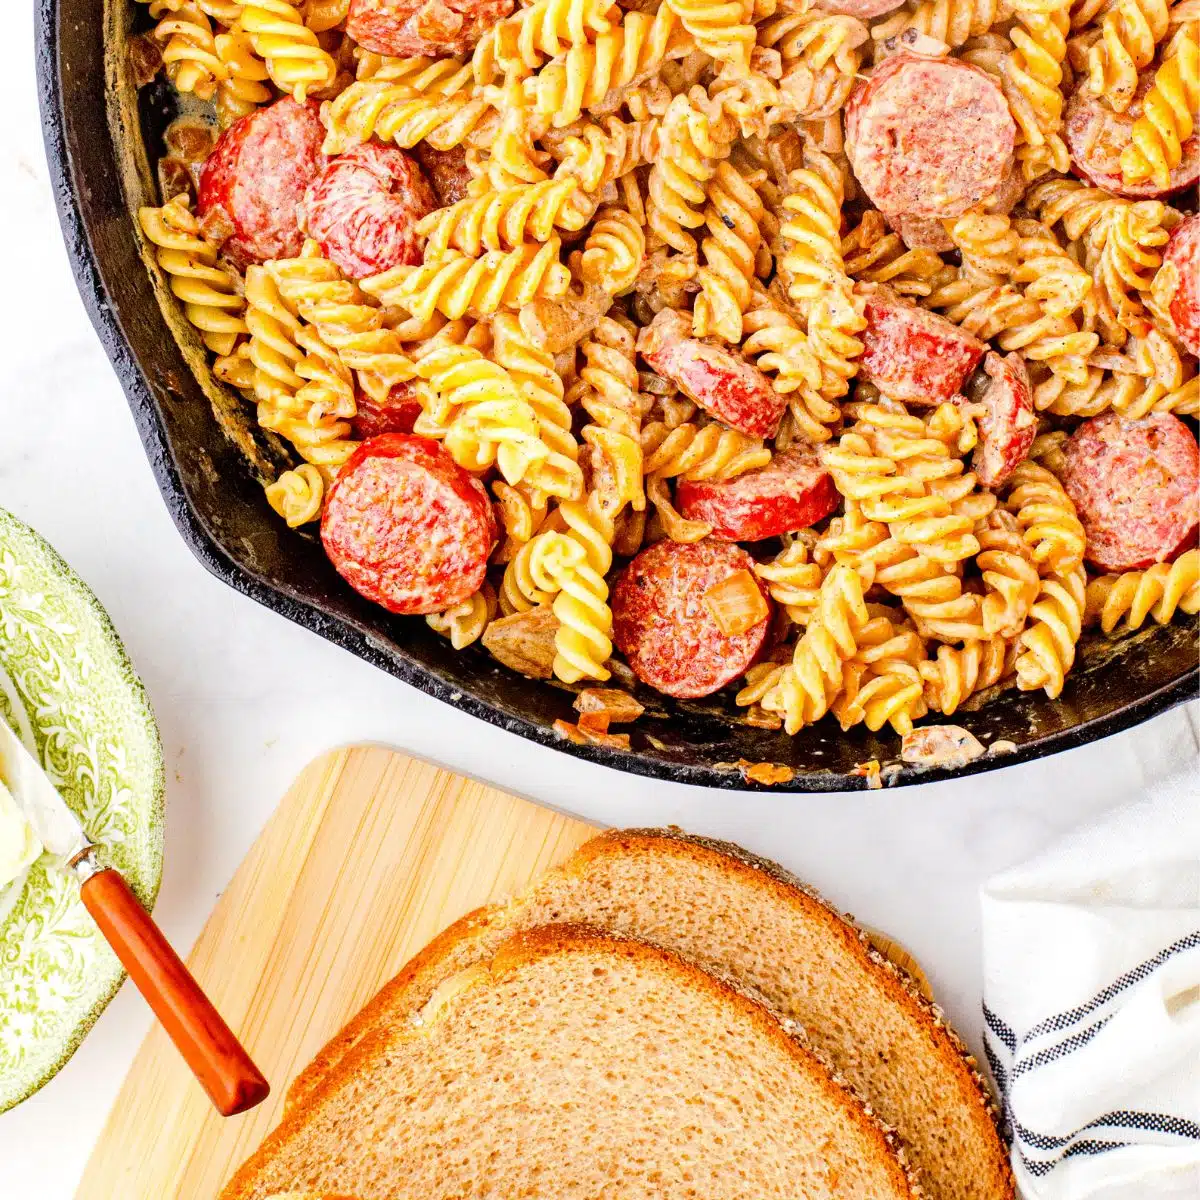 Farmers sausage and noodles recipe in a cast iron skillet with bread and butter on the side